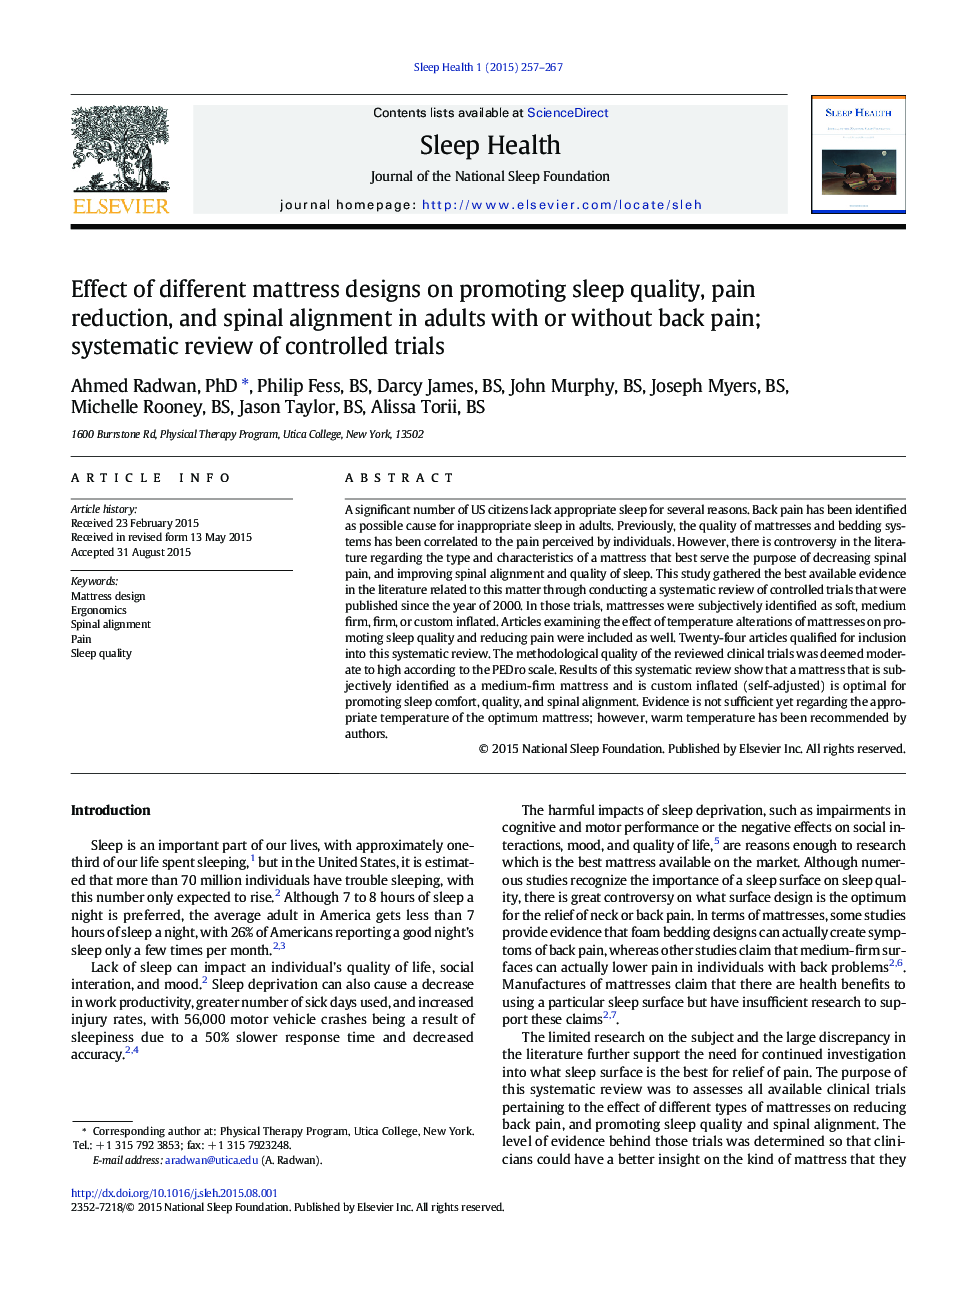 Effect of different mattress designs on promoting sleep quality, pain reduction, and spinal alignment in adults with or without back pain; systematic review of controlled trials